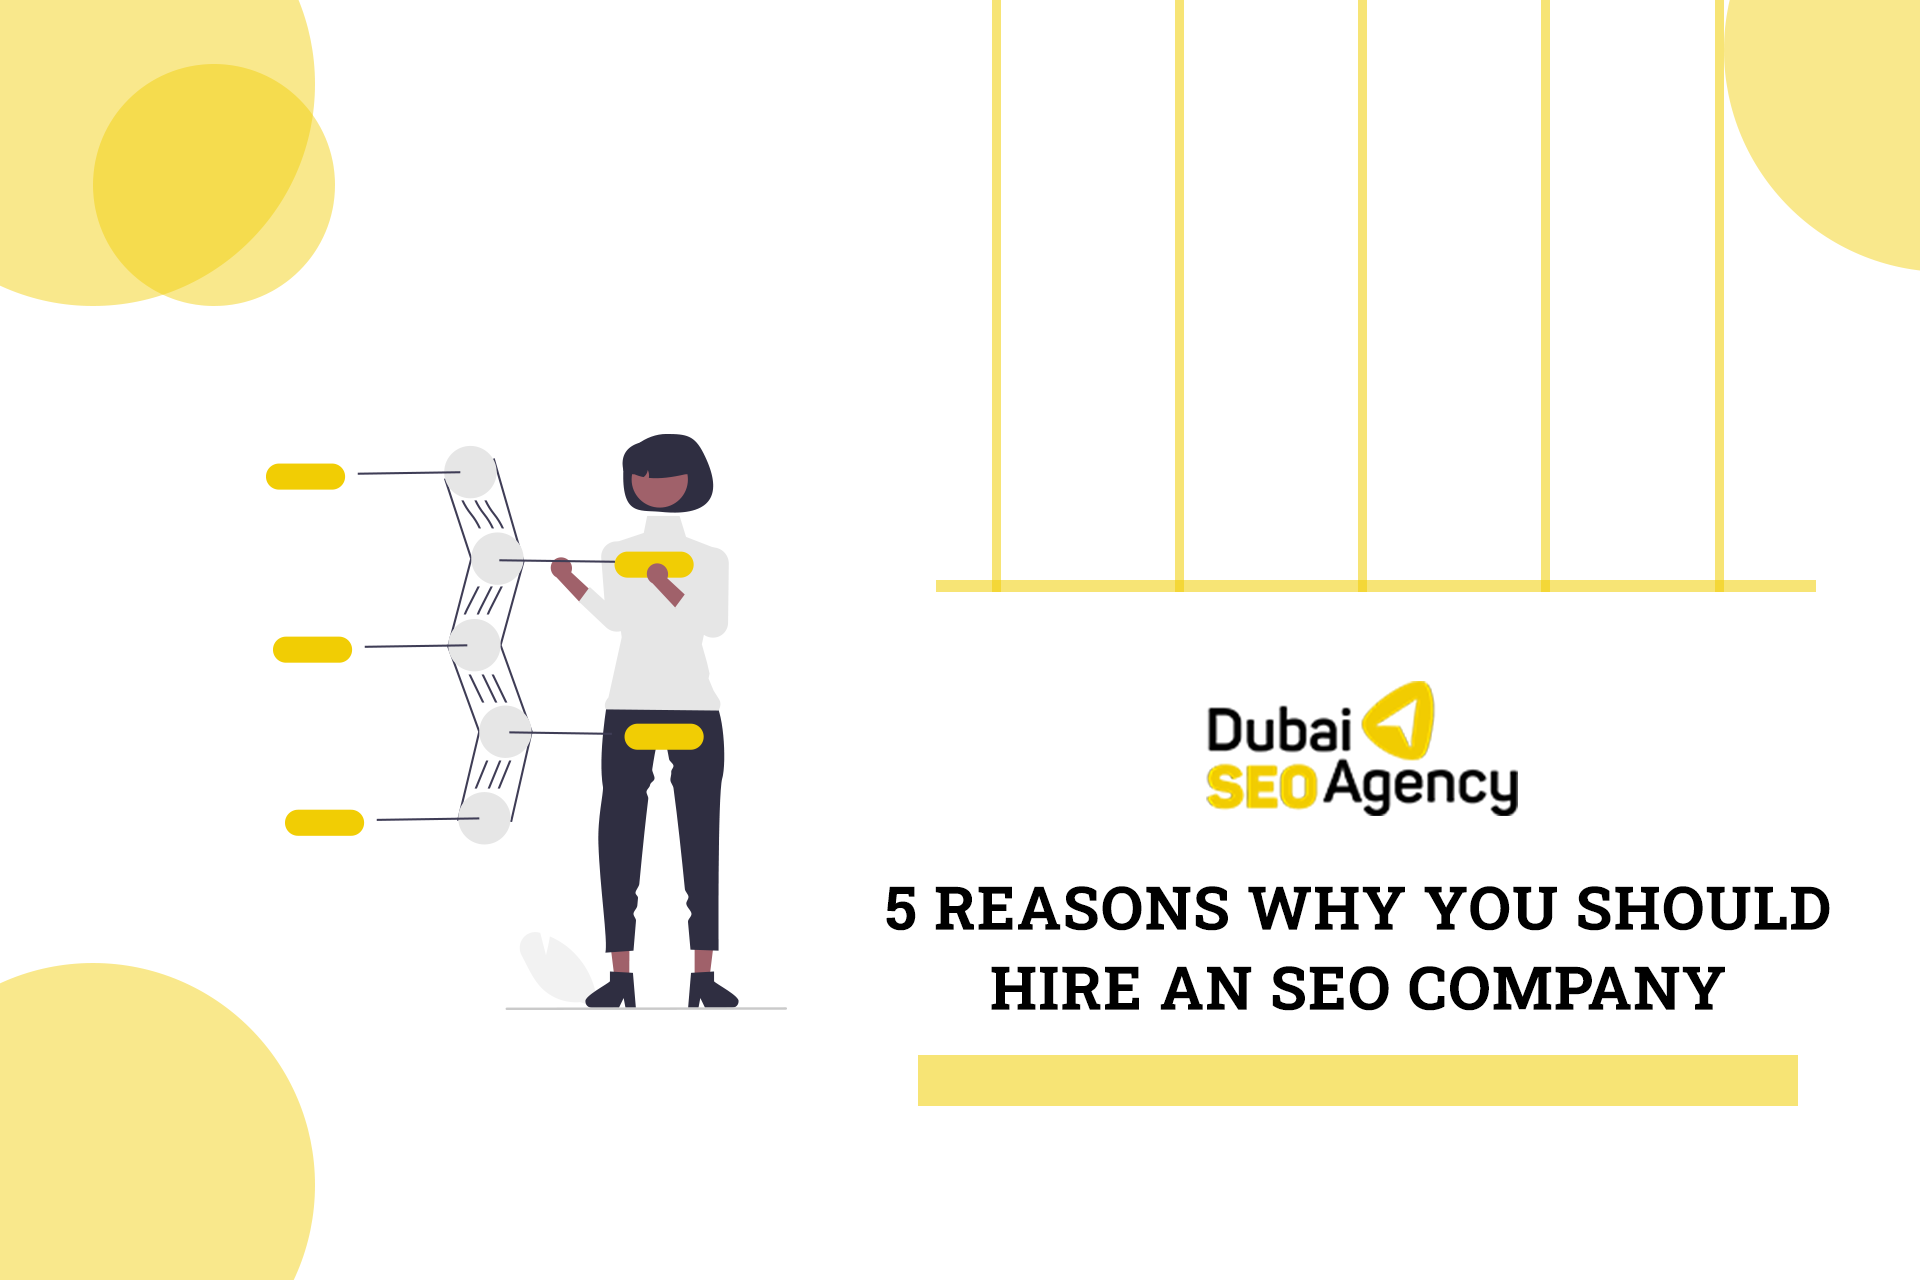 5 arguments in favor of hiring an seo agency